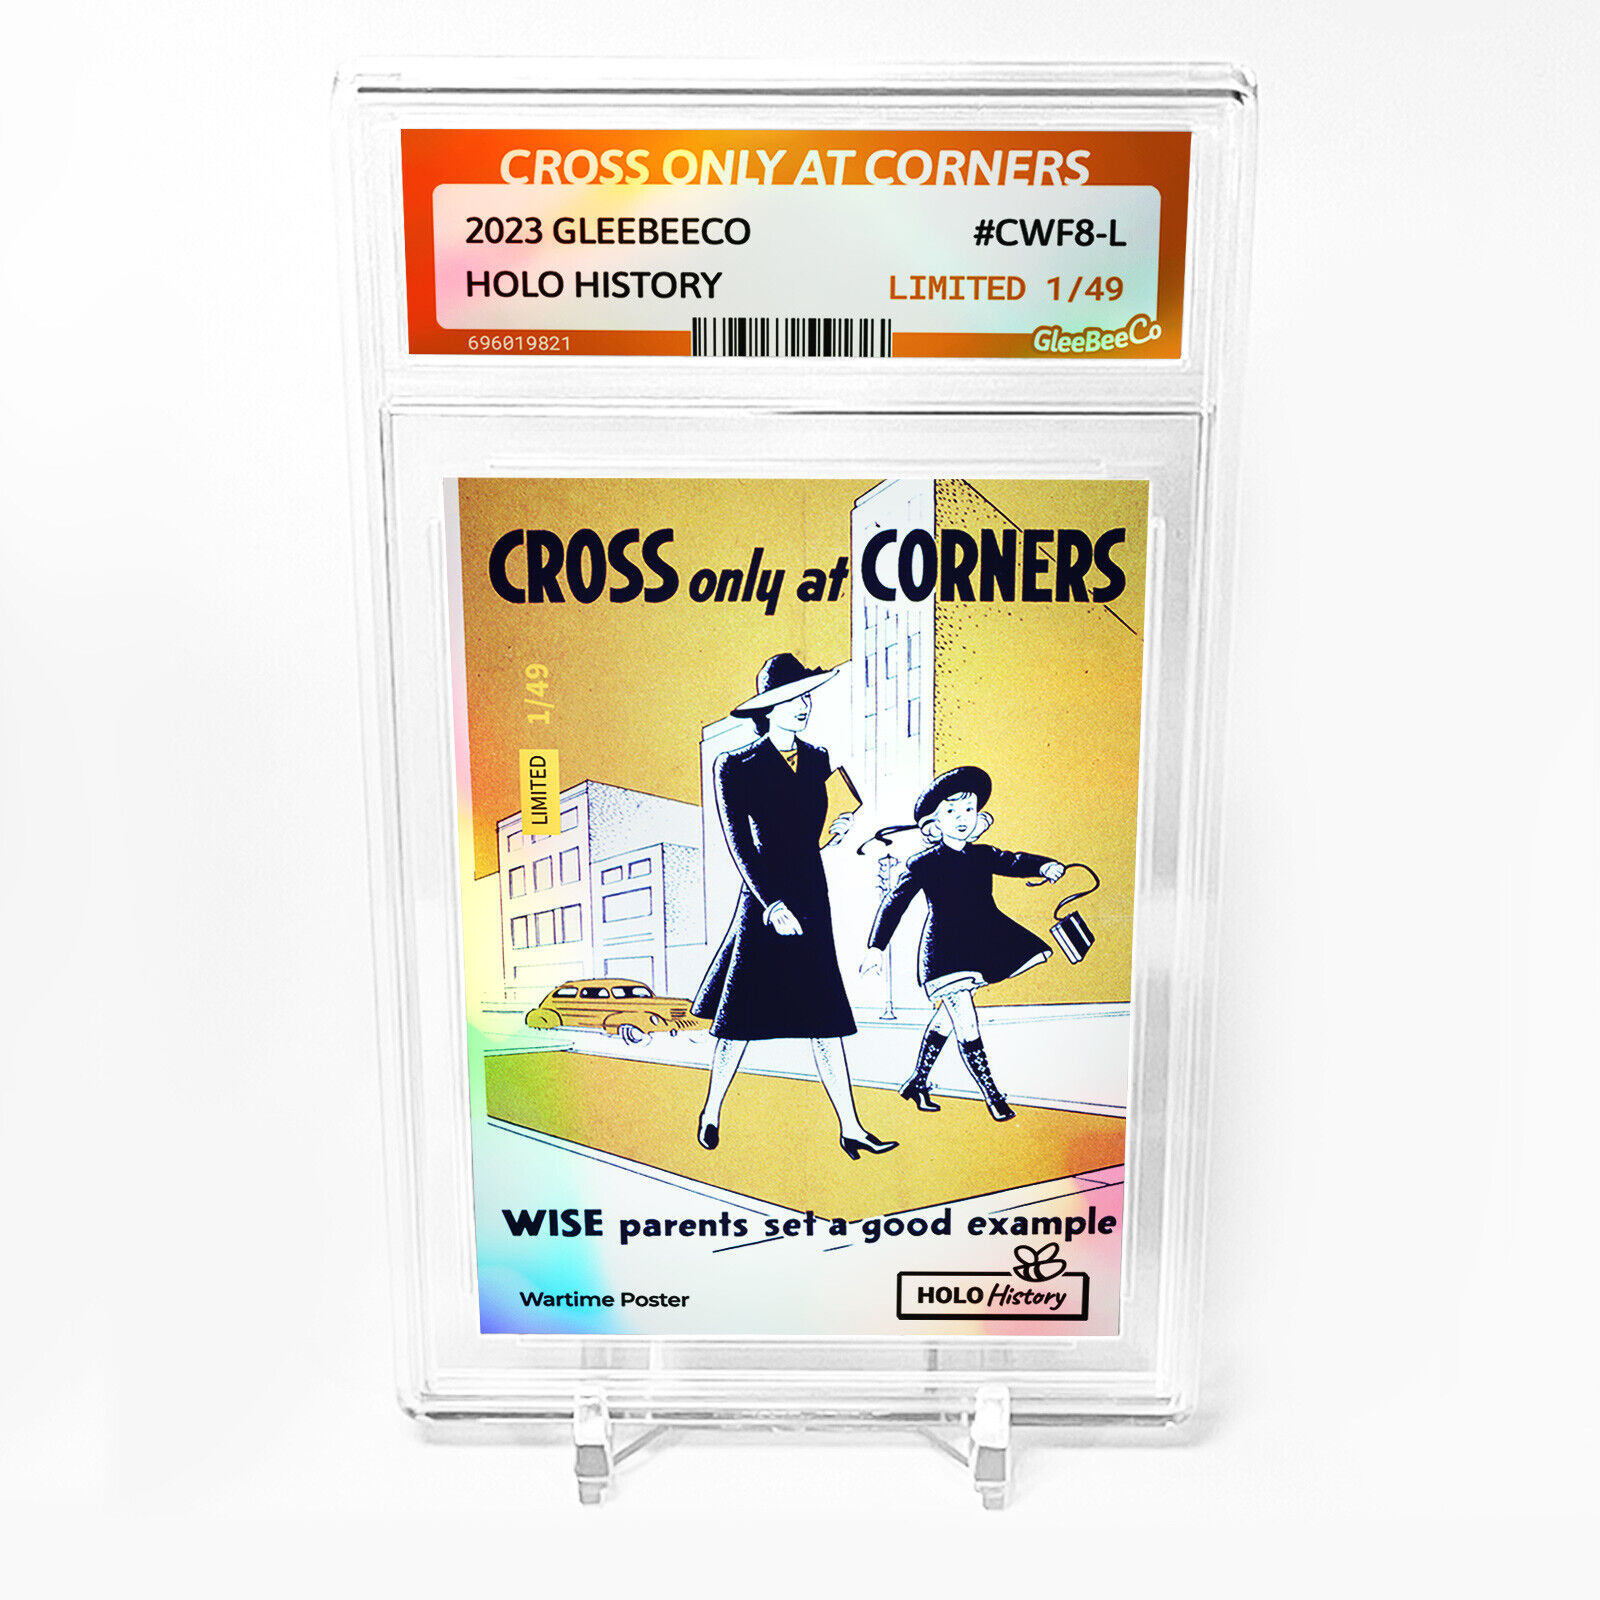 CROSS ONLY AT CORNERS Holographic Card 2023 GleeBeeCo #CWF8-L LIMITED to /49